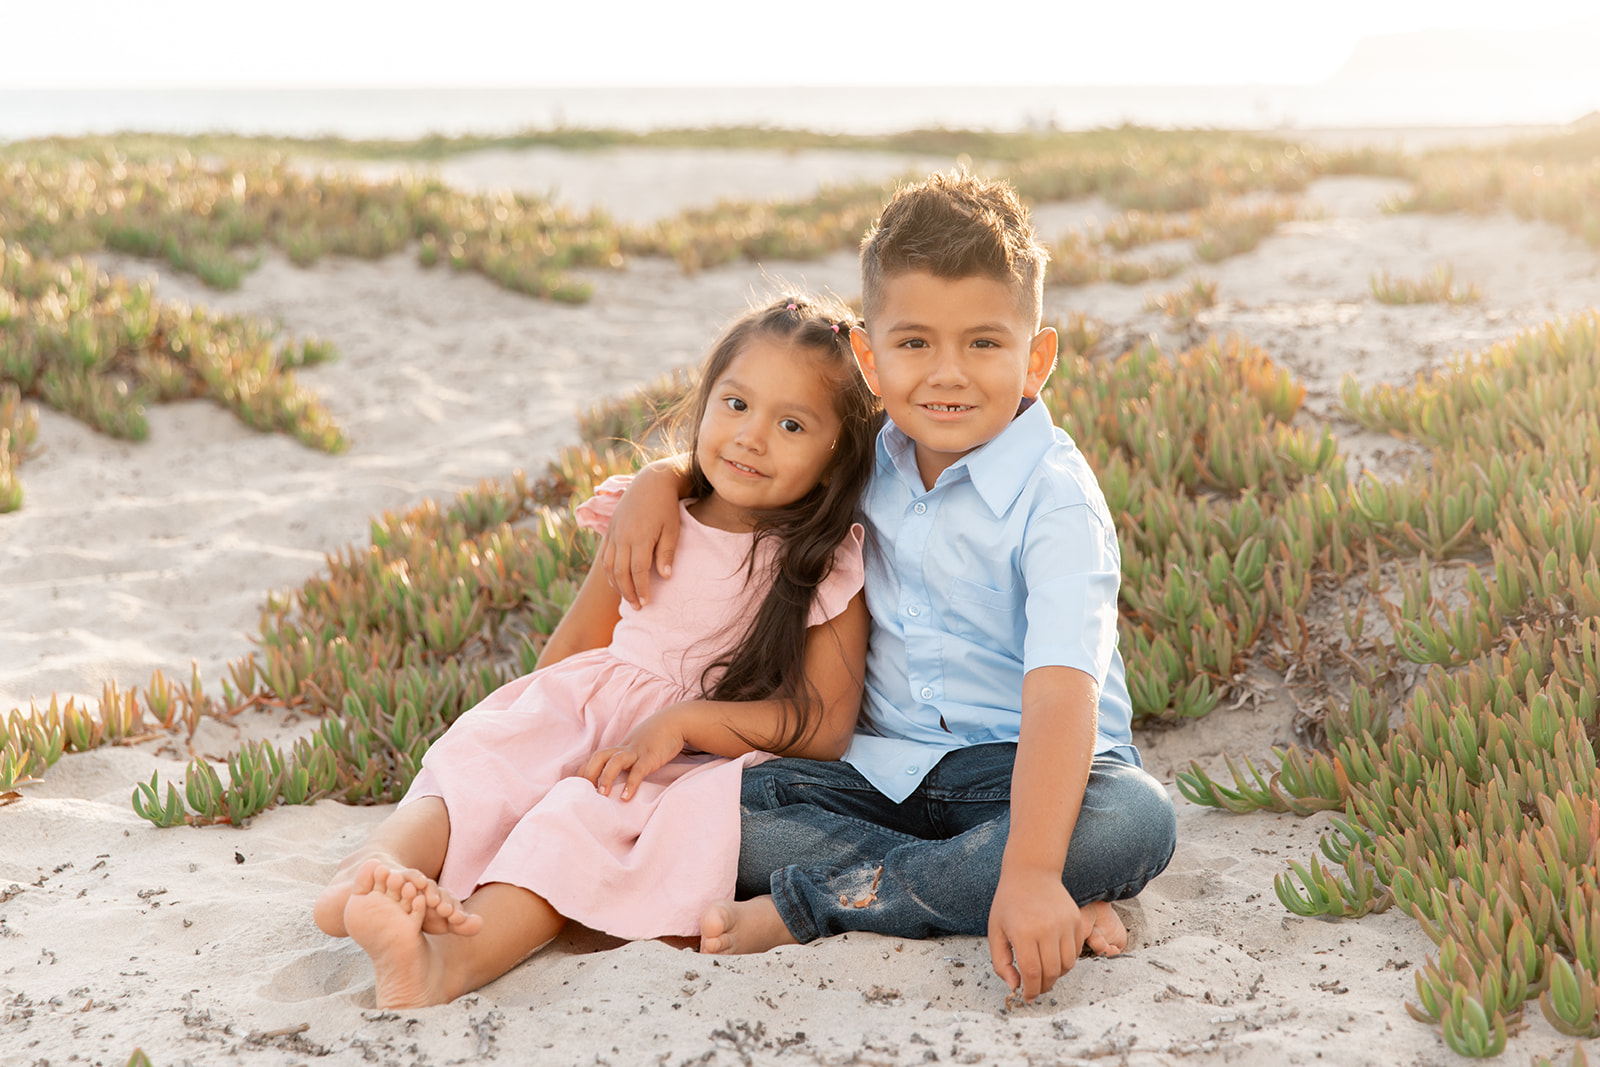 A young boy in a blue shirt and jeans sits on a beach with an arm around his younger sister at sunset